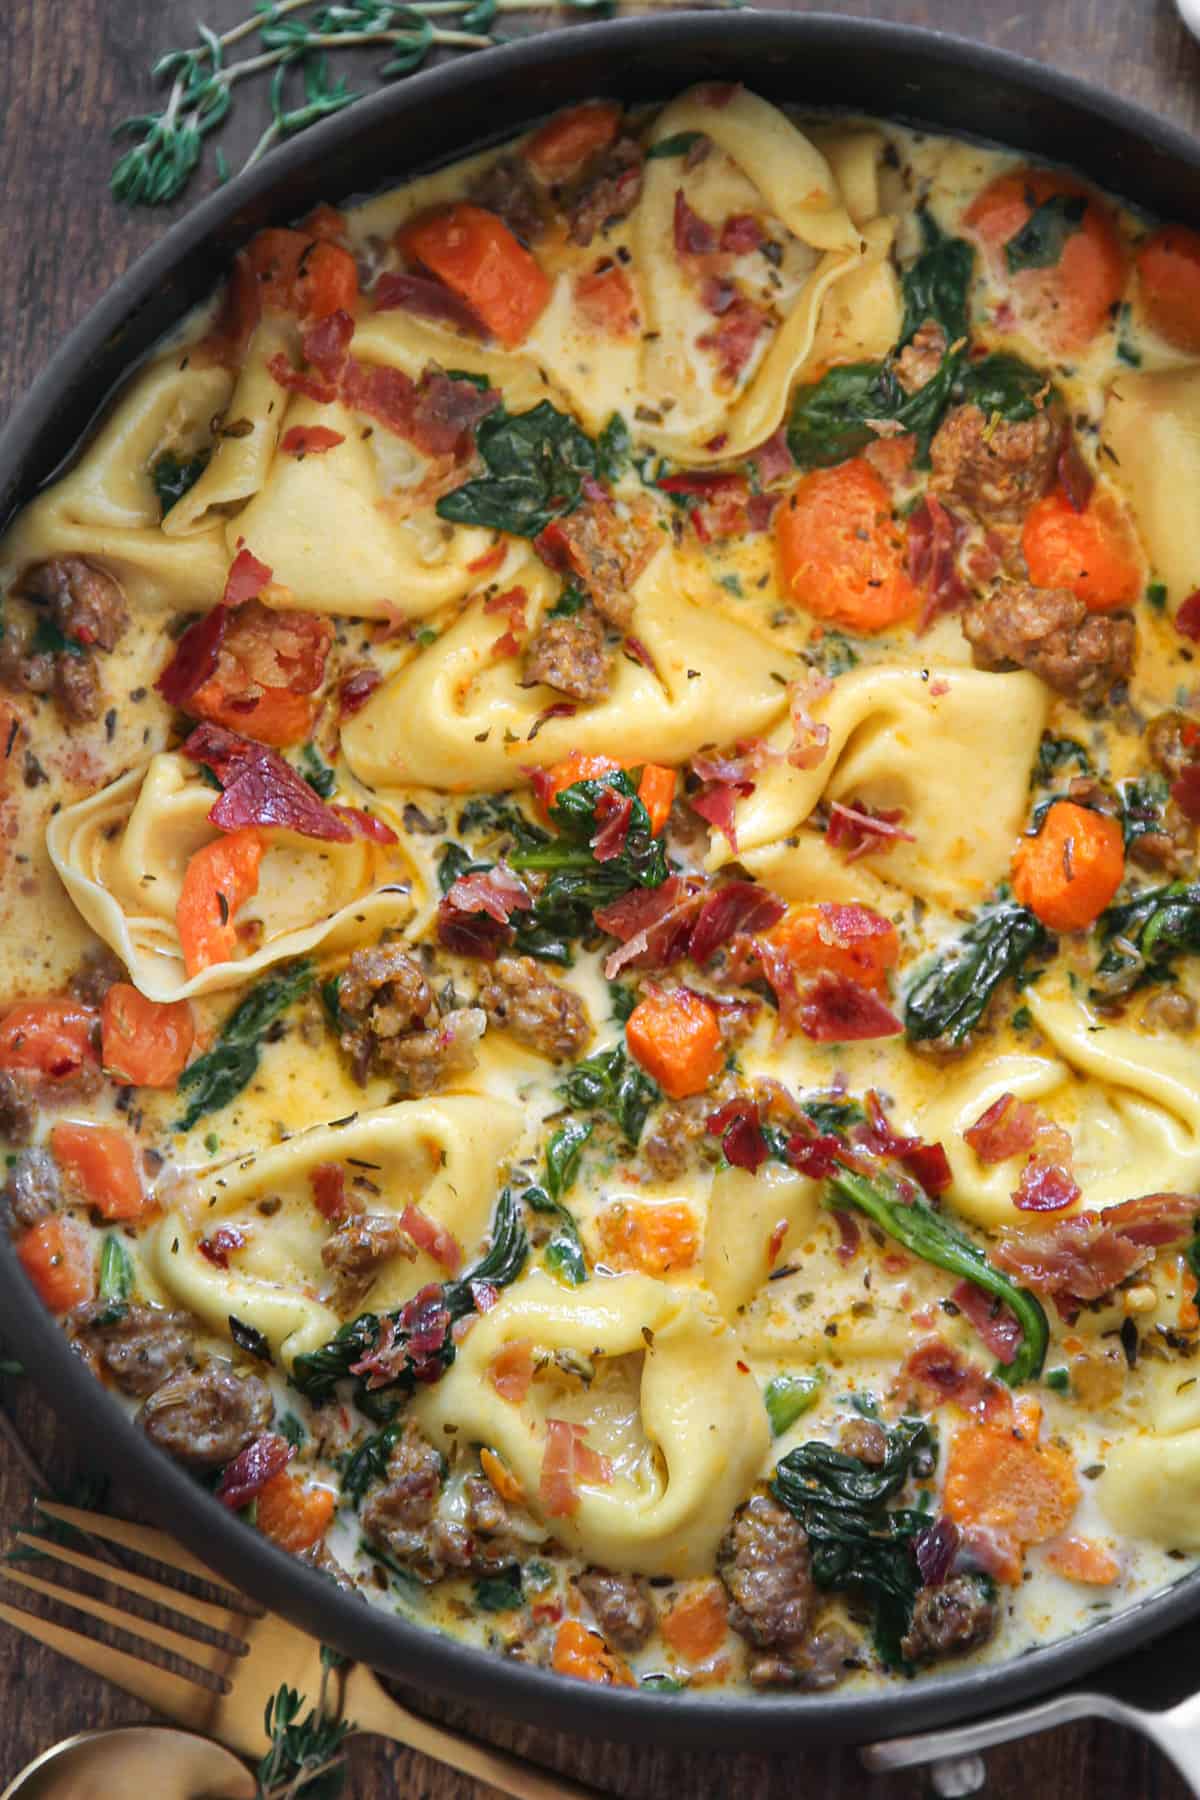 Creamy Italian Sausage Tortellini Soup with Spinach and Carrots in a saucepan.